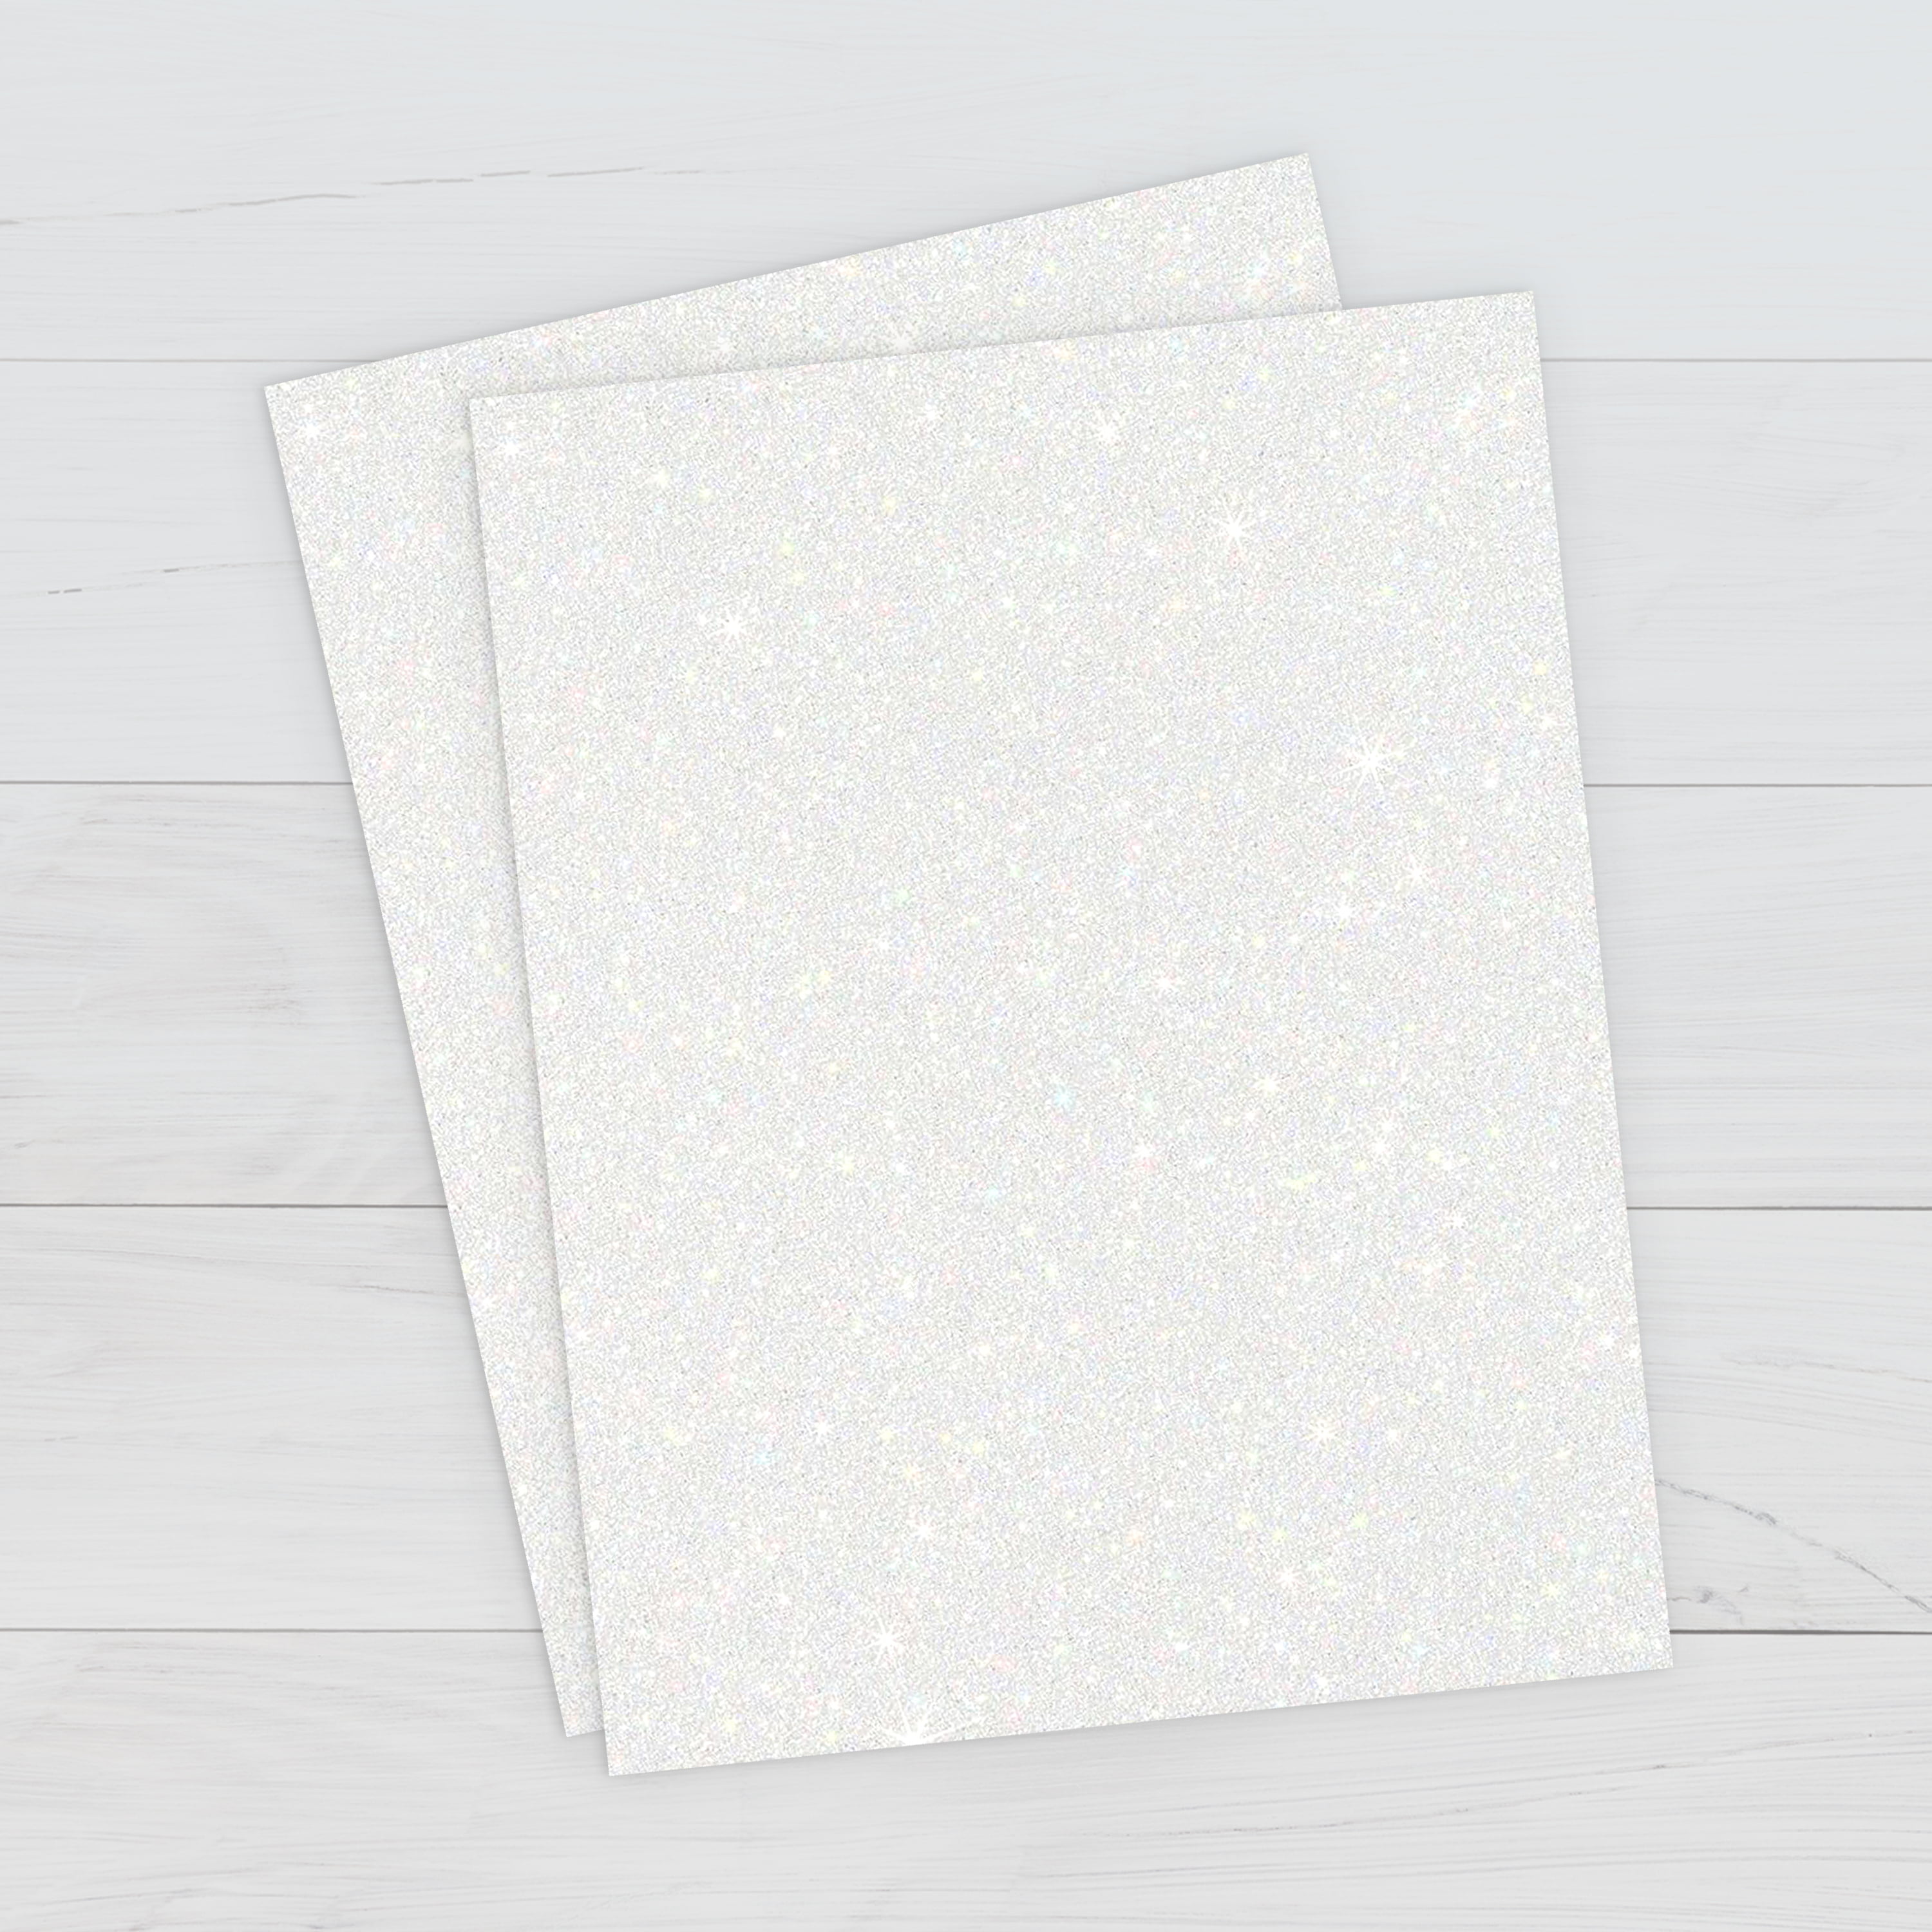 Gold Glitter Cardstock by PrintWorks